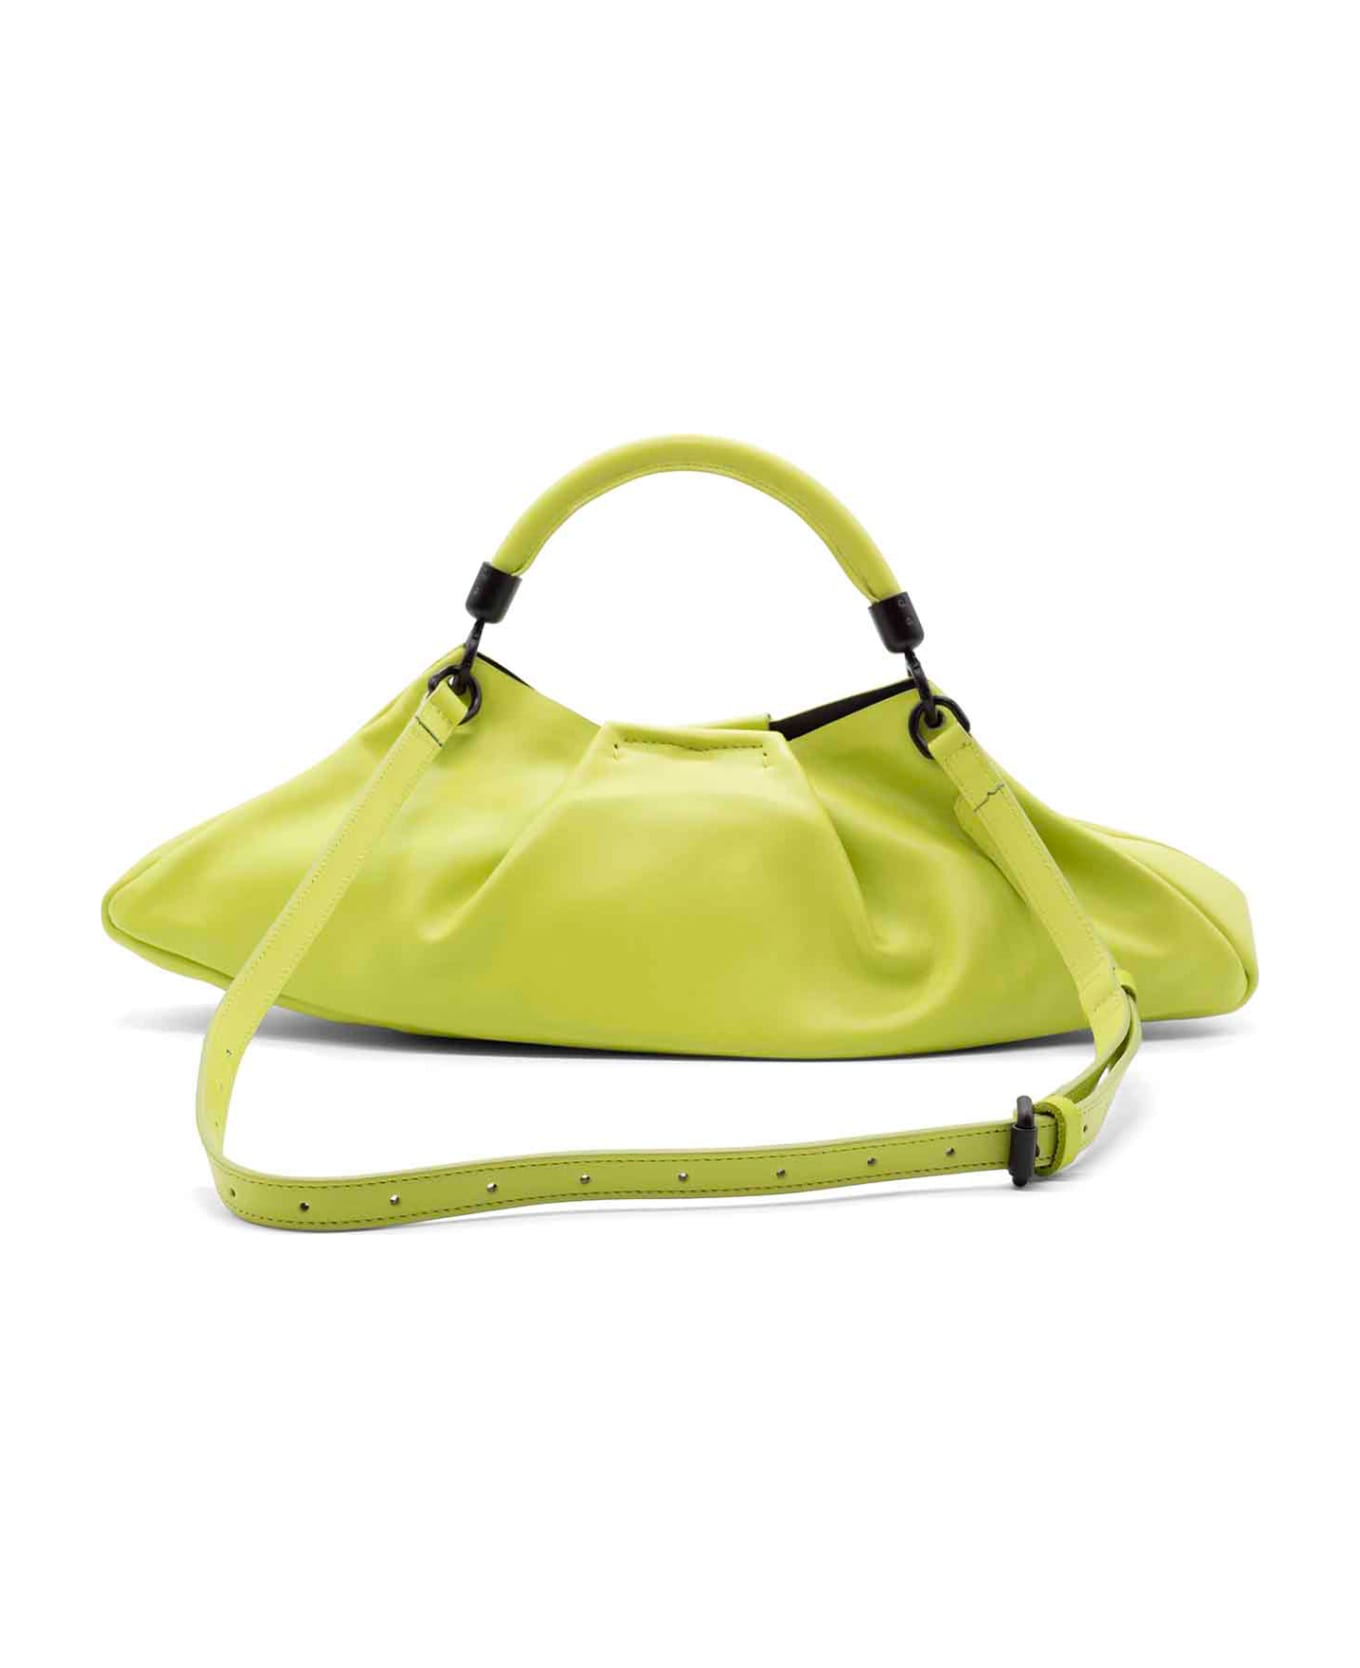 Vic Matié Lime Green Leather Clutch Bag With Shoulder Strap - CEDAR GREEN